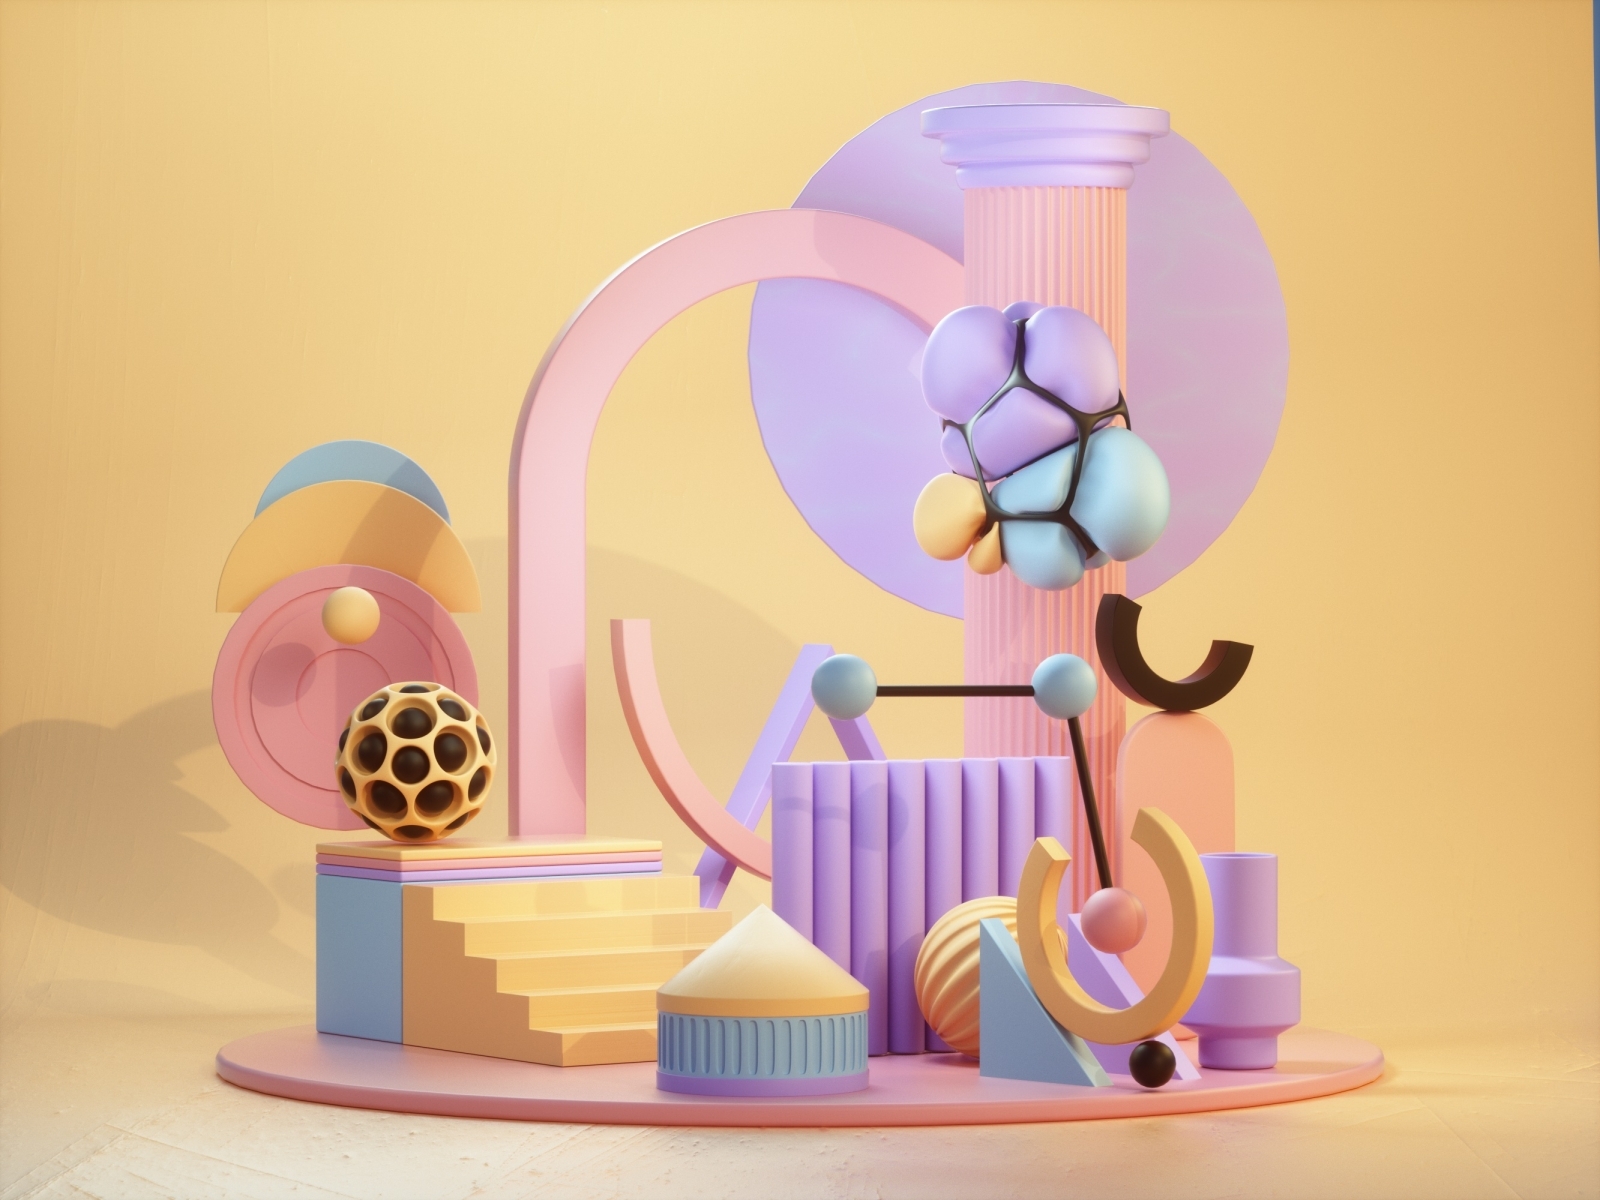 3D Abstract Composition - shhhht by rastovicfilip on Dribbble